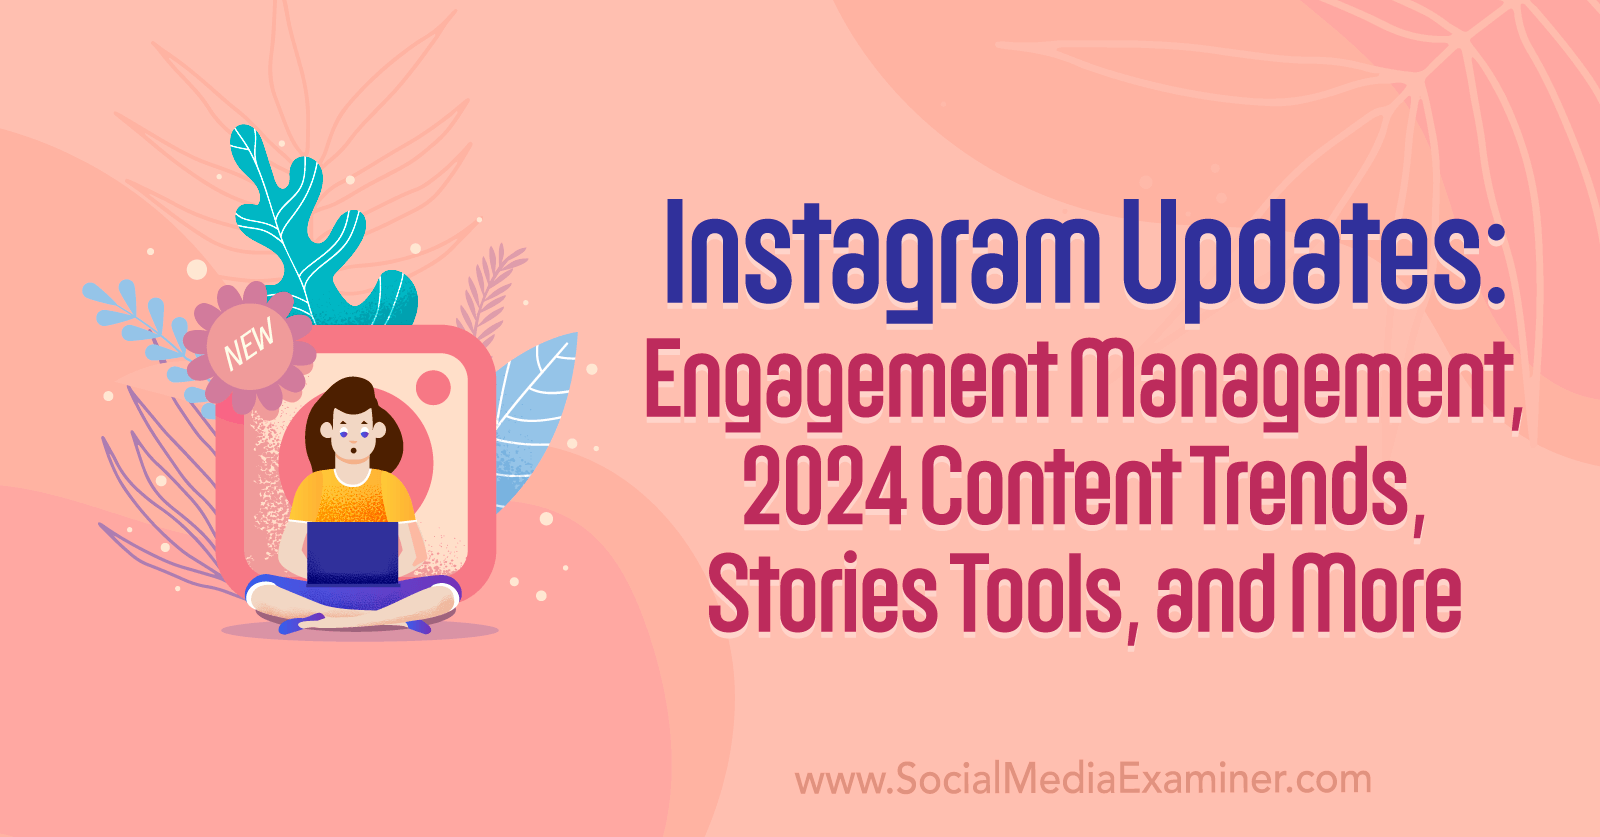 Instagram Updates: Stories Tools, Engagement Management, 2024 Content Trends, and More by Social Media Examiner